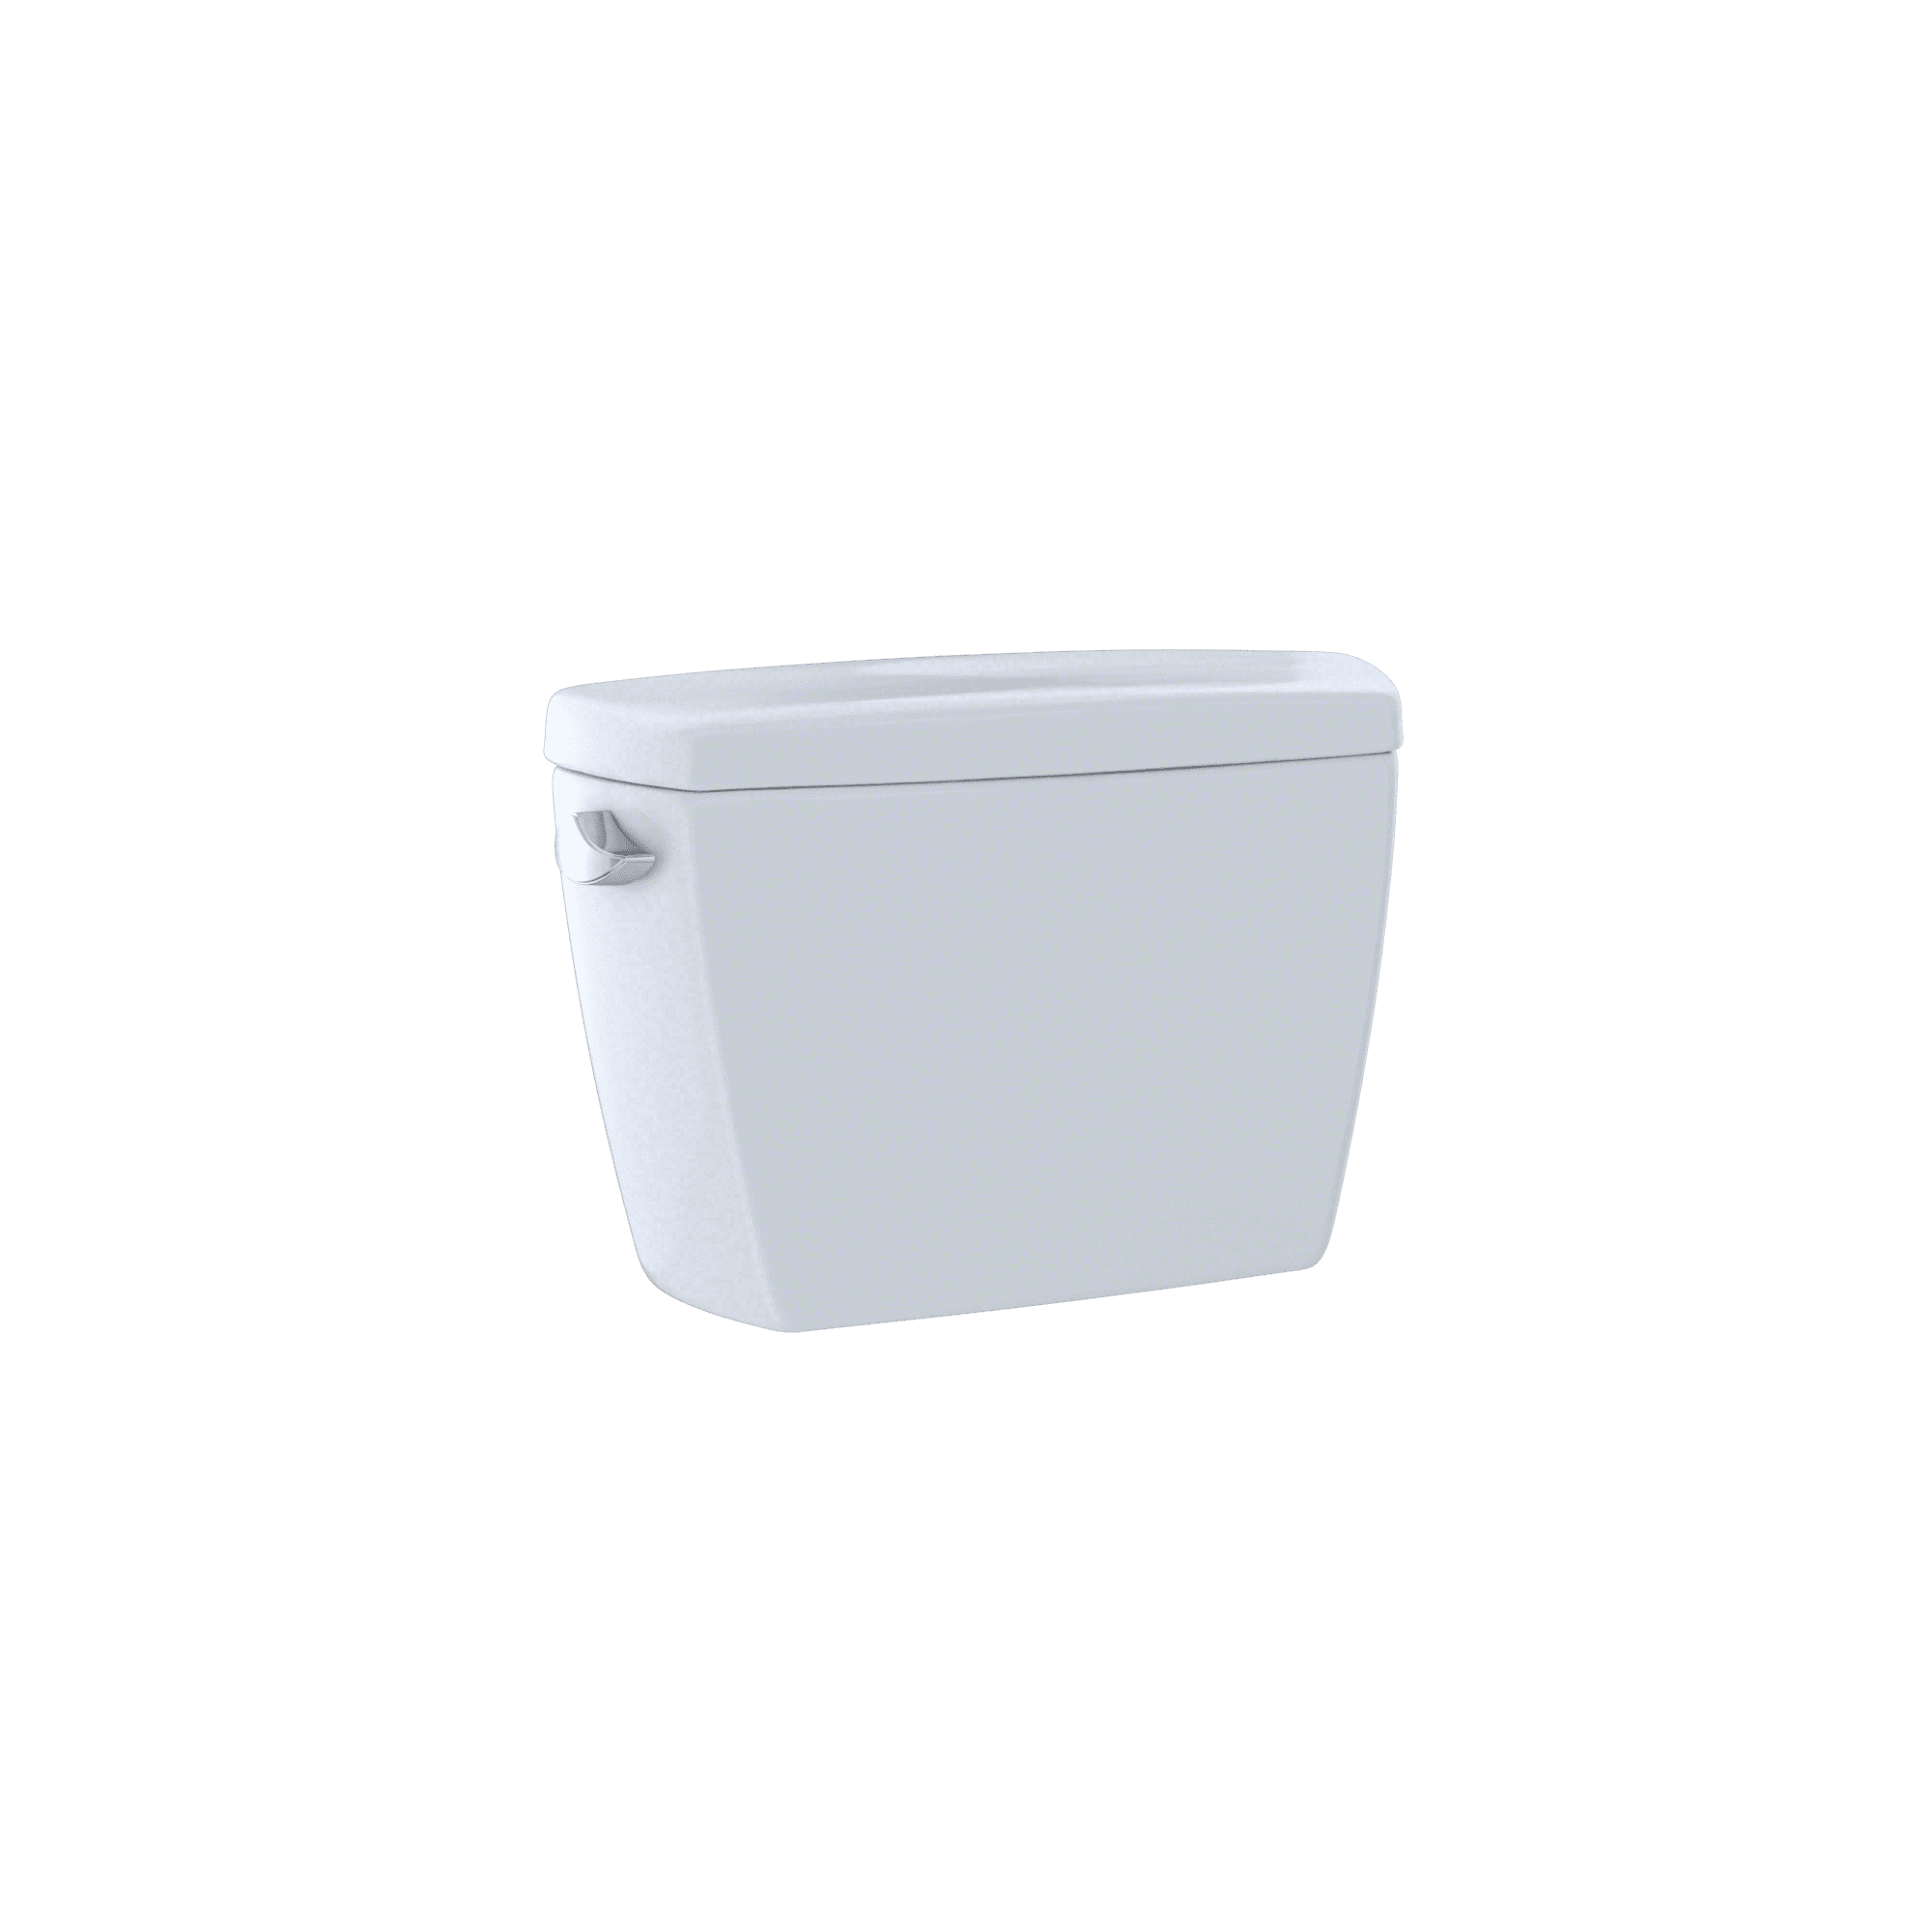 Toto ST743S#01 Toilet Tank Cotton White from the Drake Collection 